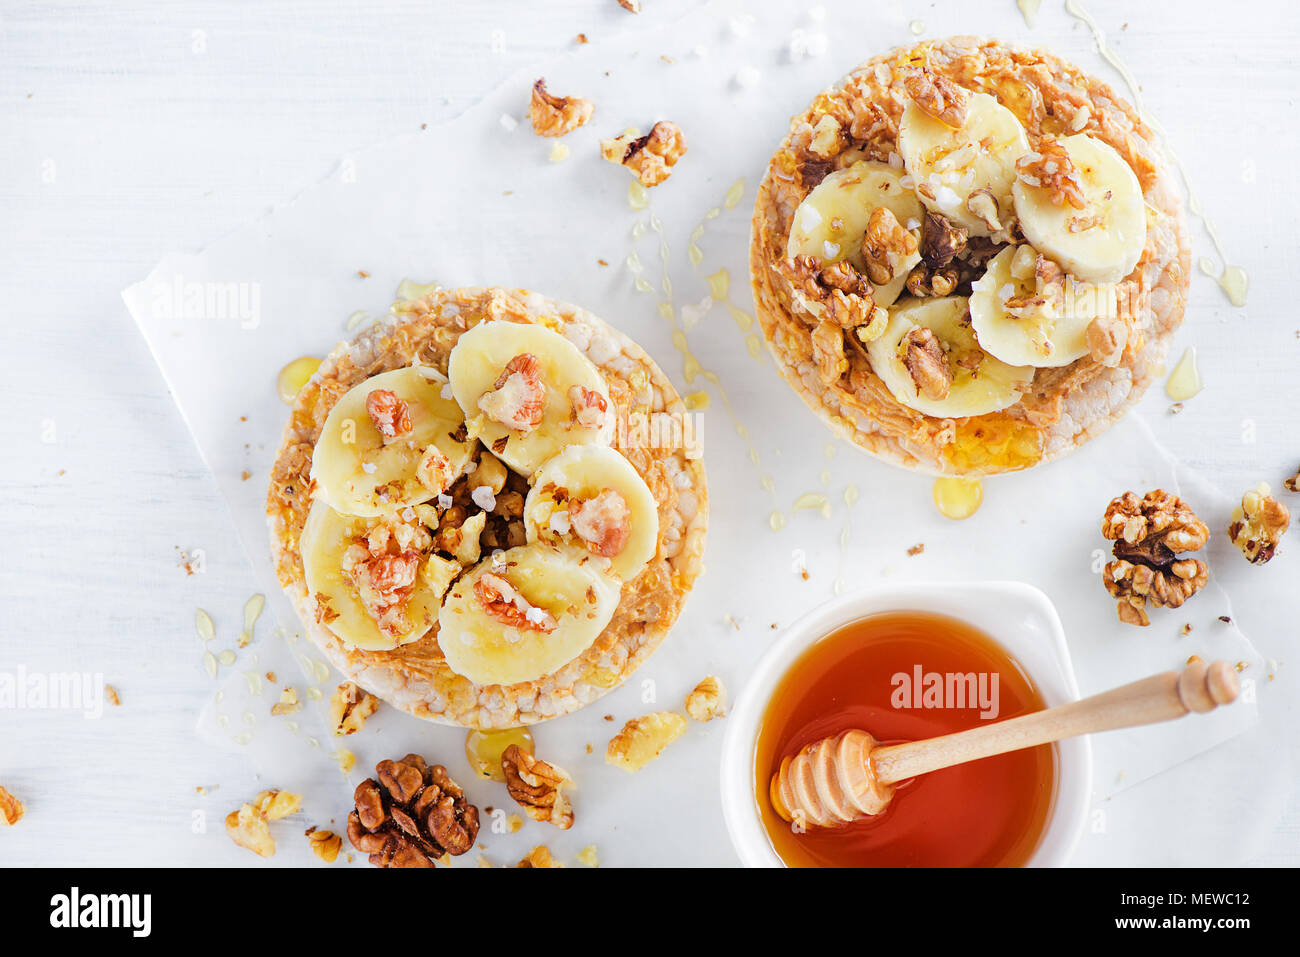 Crisp bread banana and peanut butter snack. Healthy breakfast with walnuts and honey. High key diet concept. Stock Photo